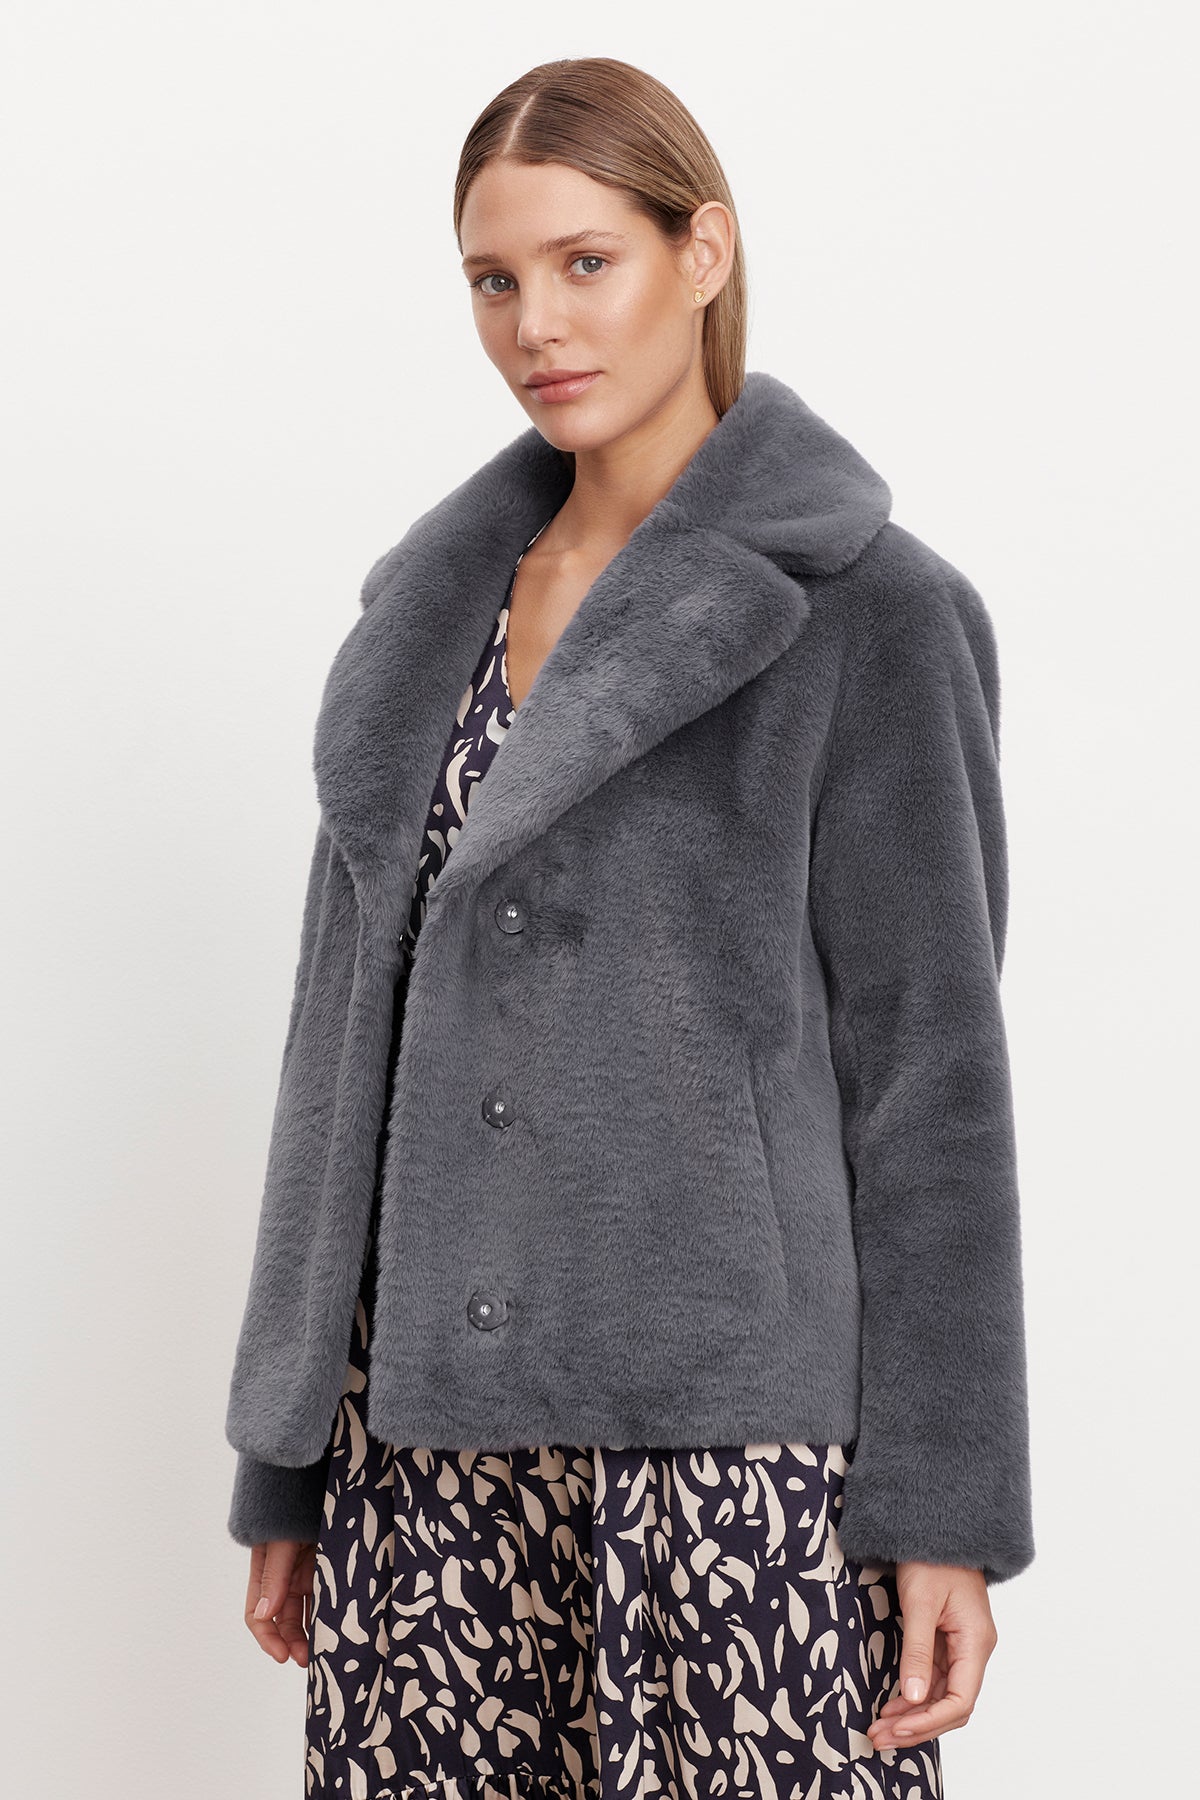 The model is wearing a grey Velvet by Graham & Spencer RAQUEL FAUX LUX FUR JACKET, perfect for cold weather.-35571988725953